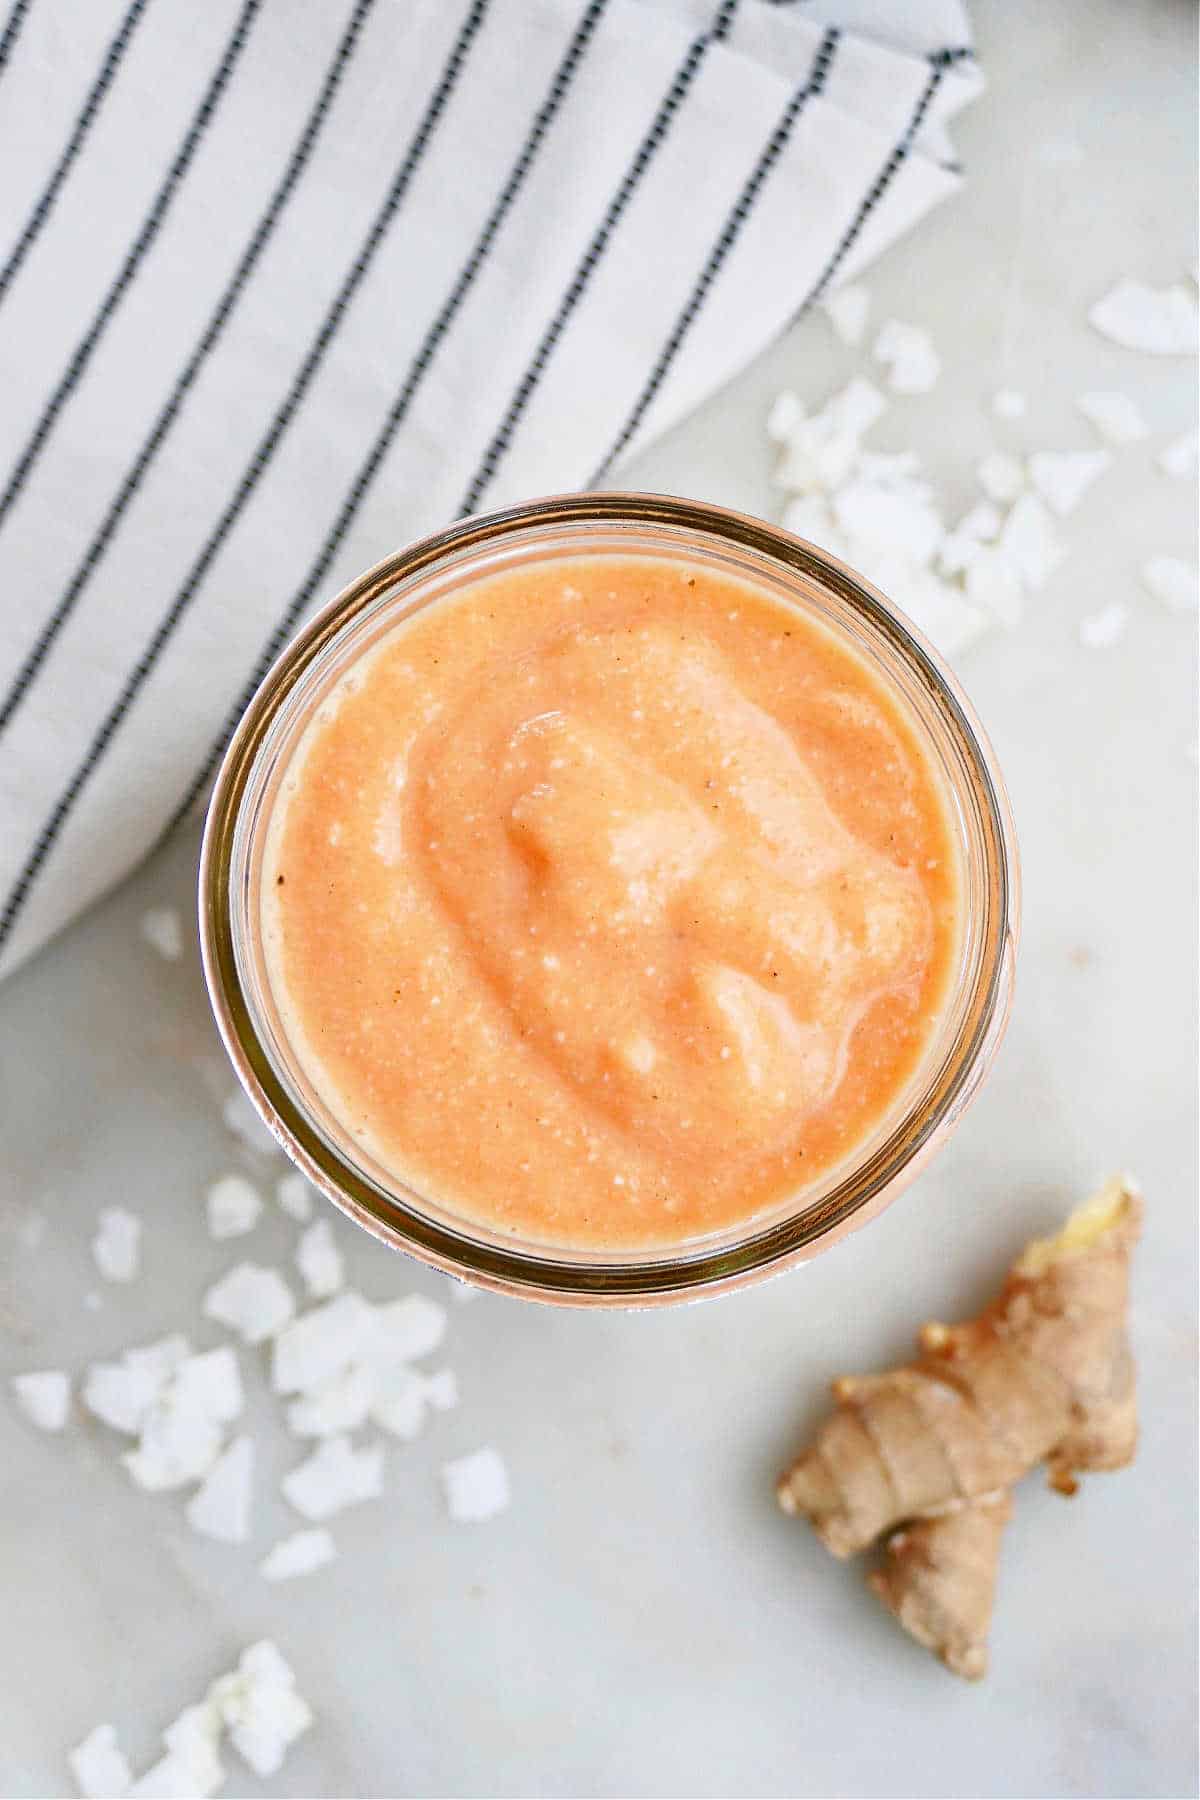 carrot banana smoothie in a glass next to ingredients and a napkin